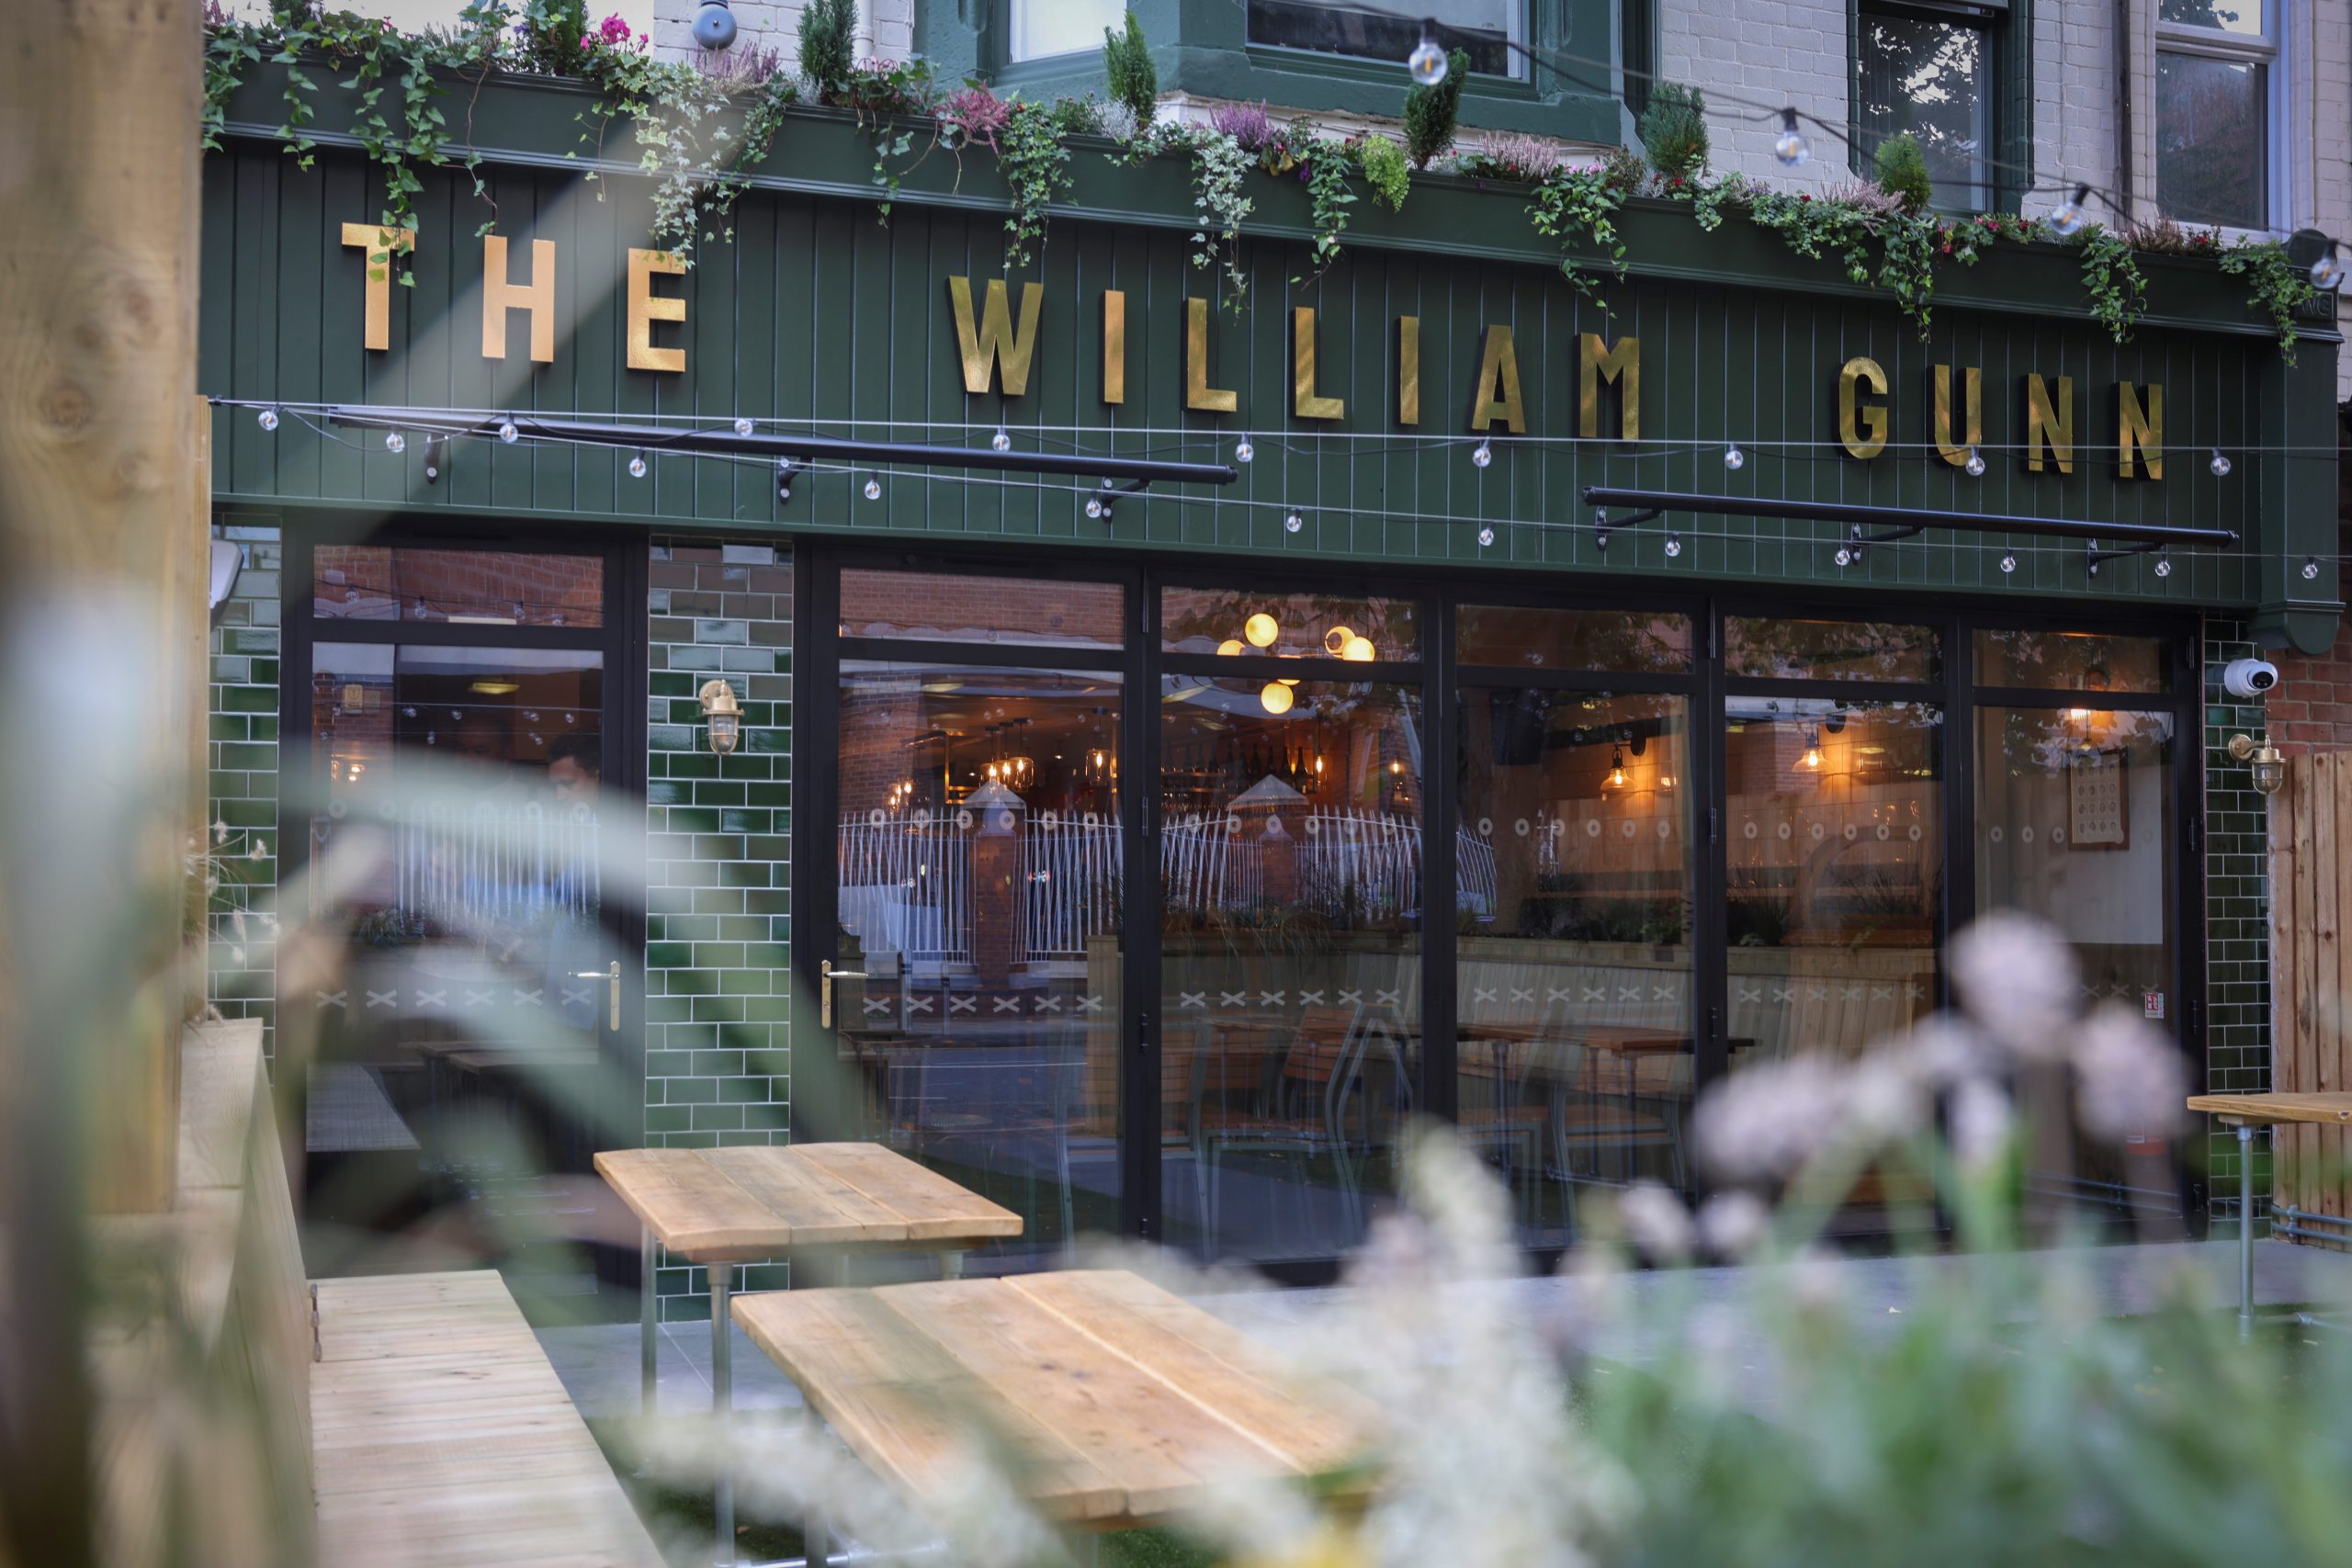 The William Gunn recently opened with great fish Fridays specials and steak night scaled